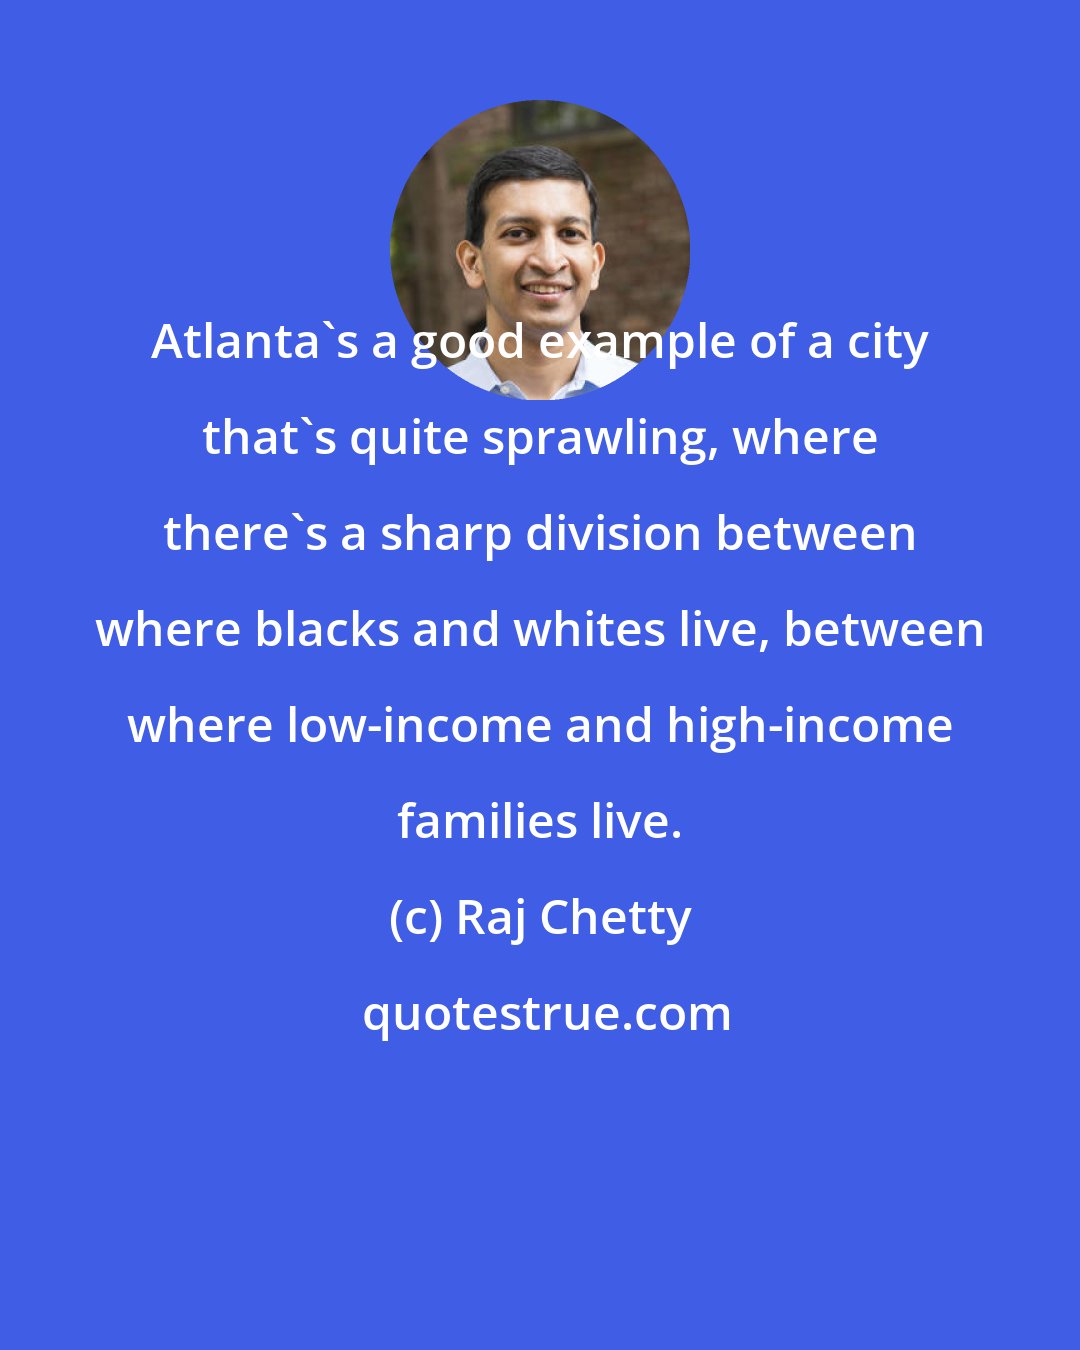 Raj Chetty: Atlanta's a good example of a city that's quite sprawling, where there's a sharp division between where blacks and whites live, between where low-income and high-income families live.